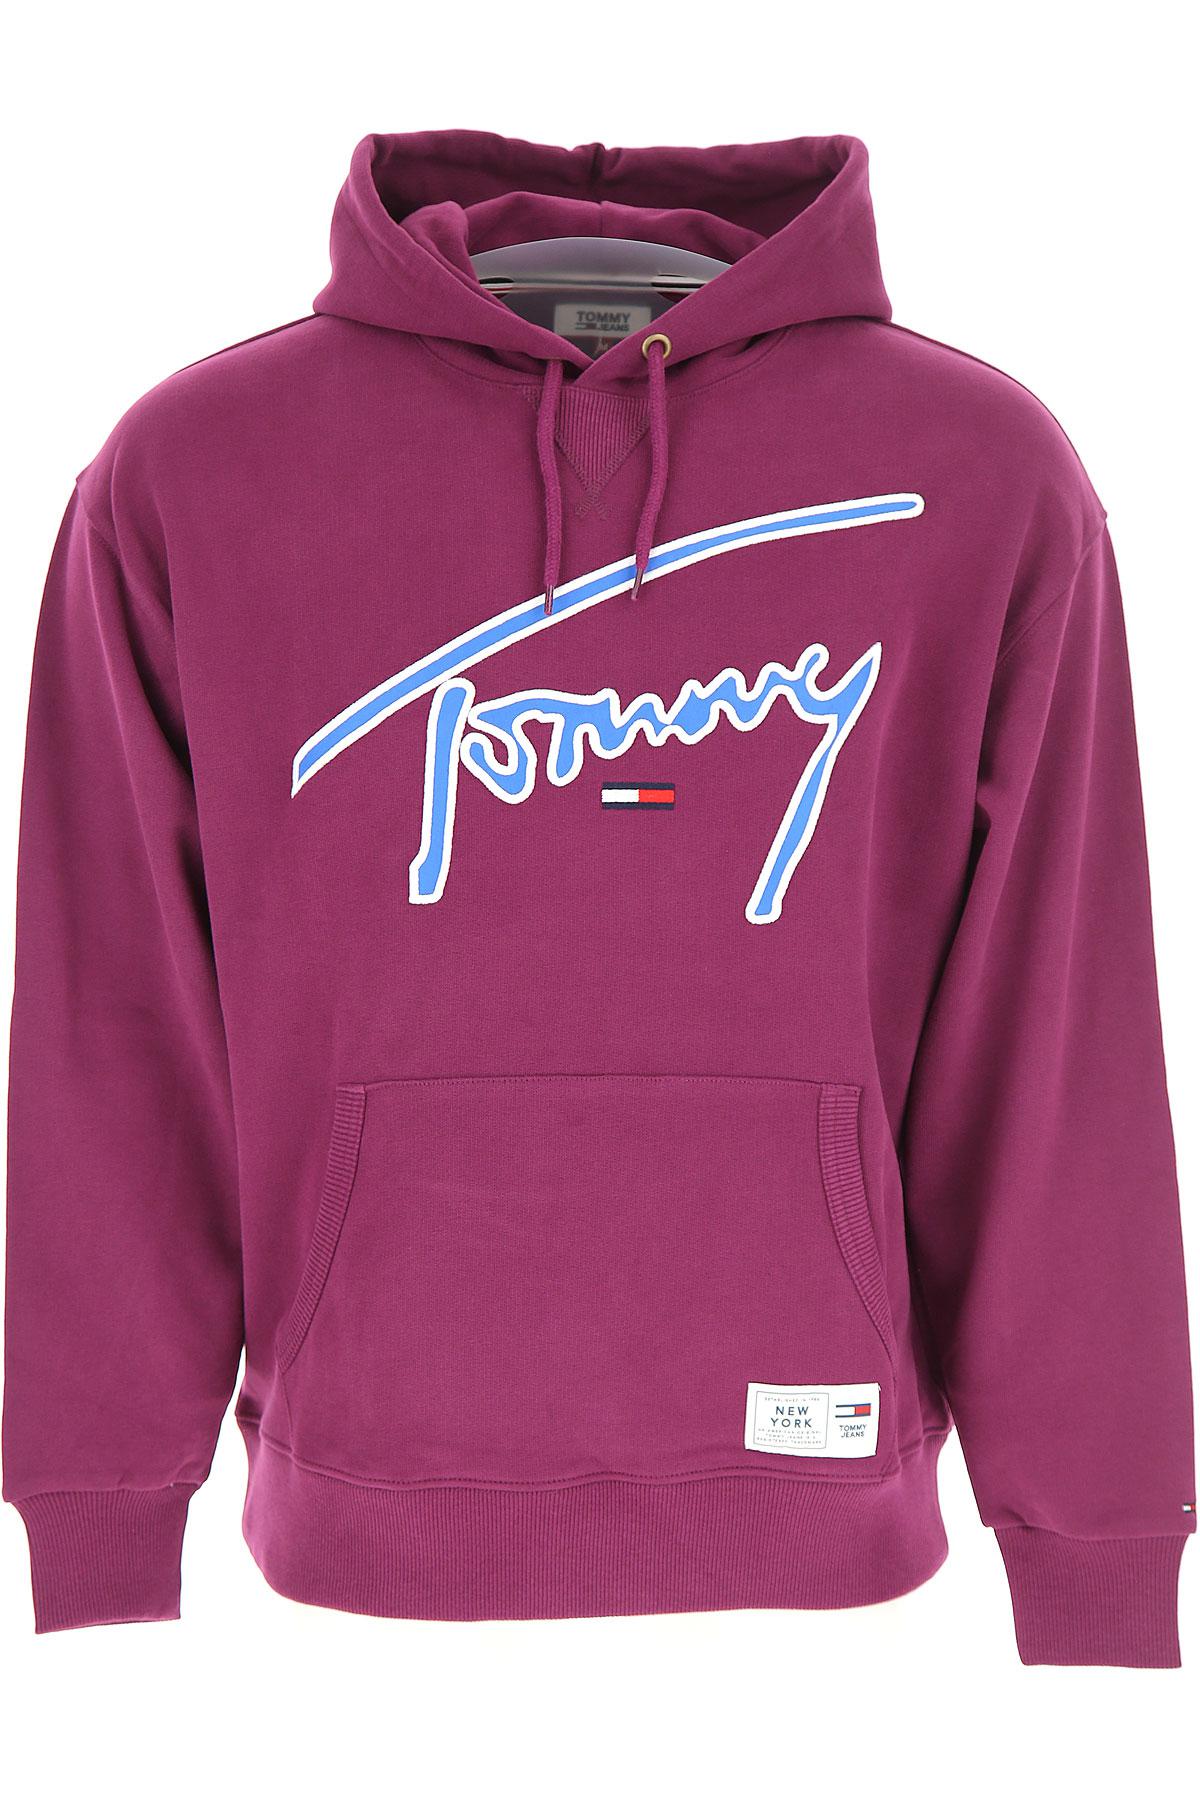 Tommy Hilfiger Purple Hoodie Hotsell, SAVE 44% - belcoinvestments.com